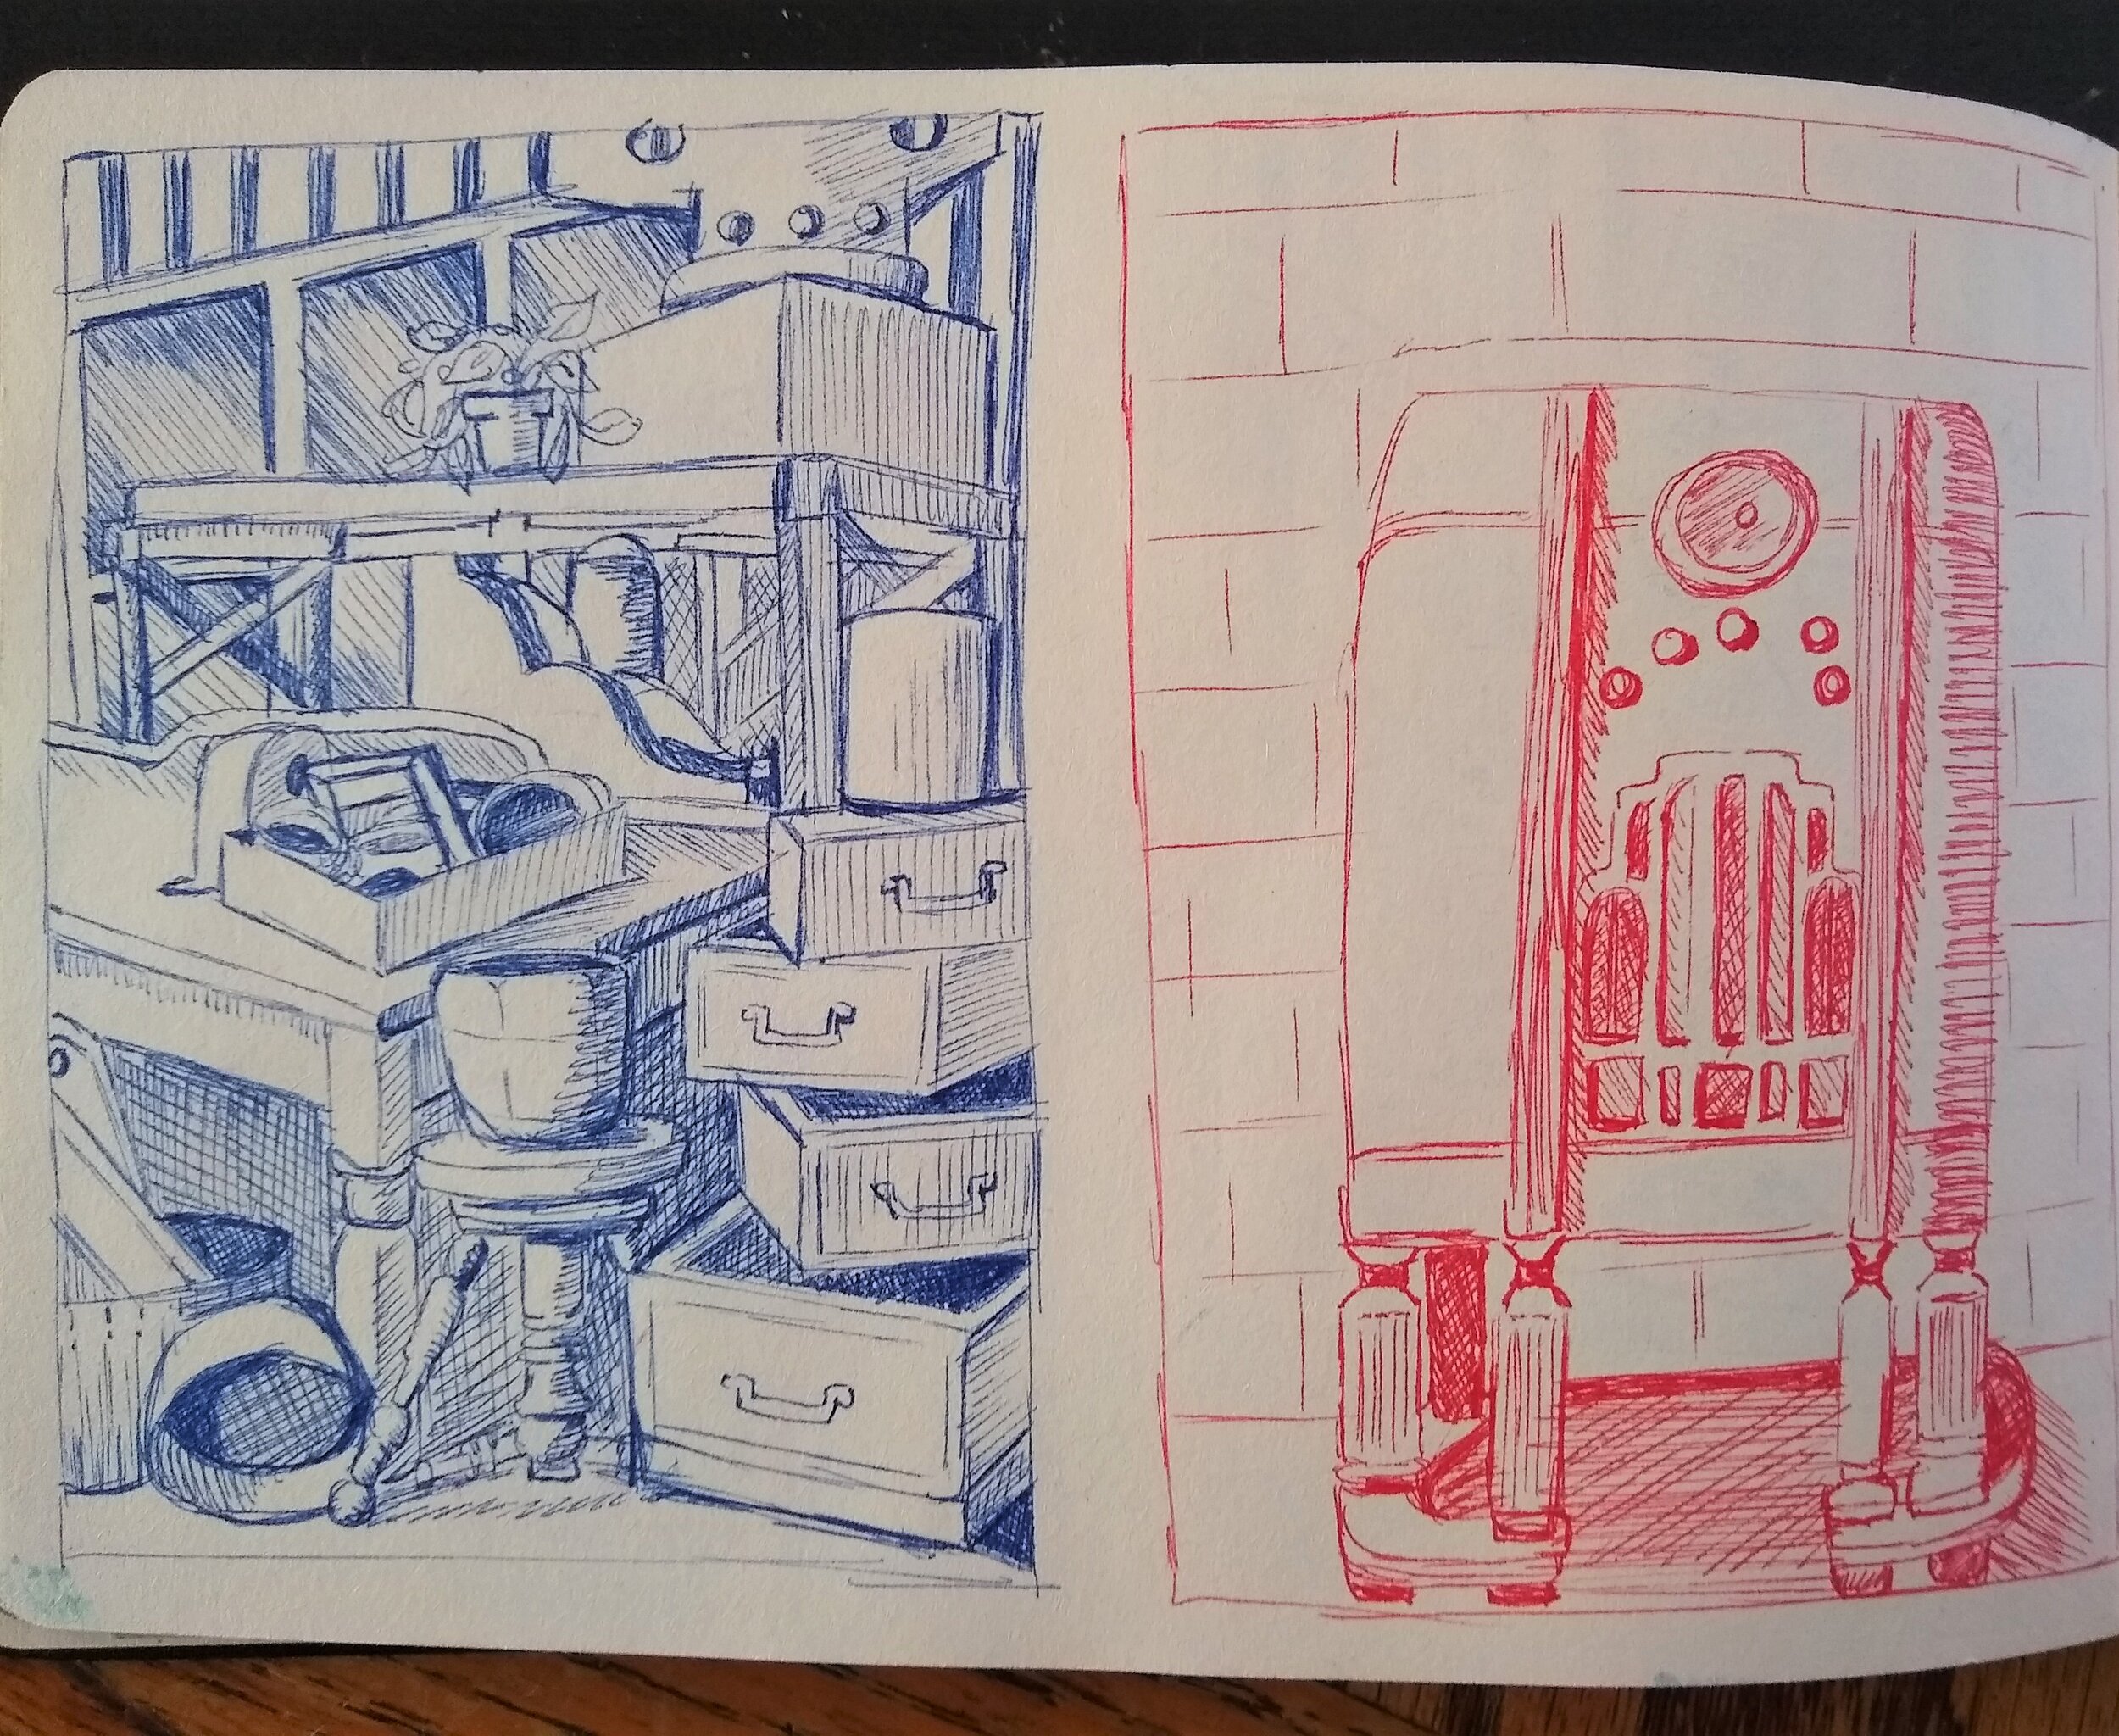 The Ineffable Charm of an Artist's Sketchbook